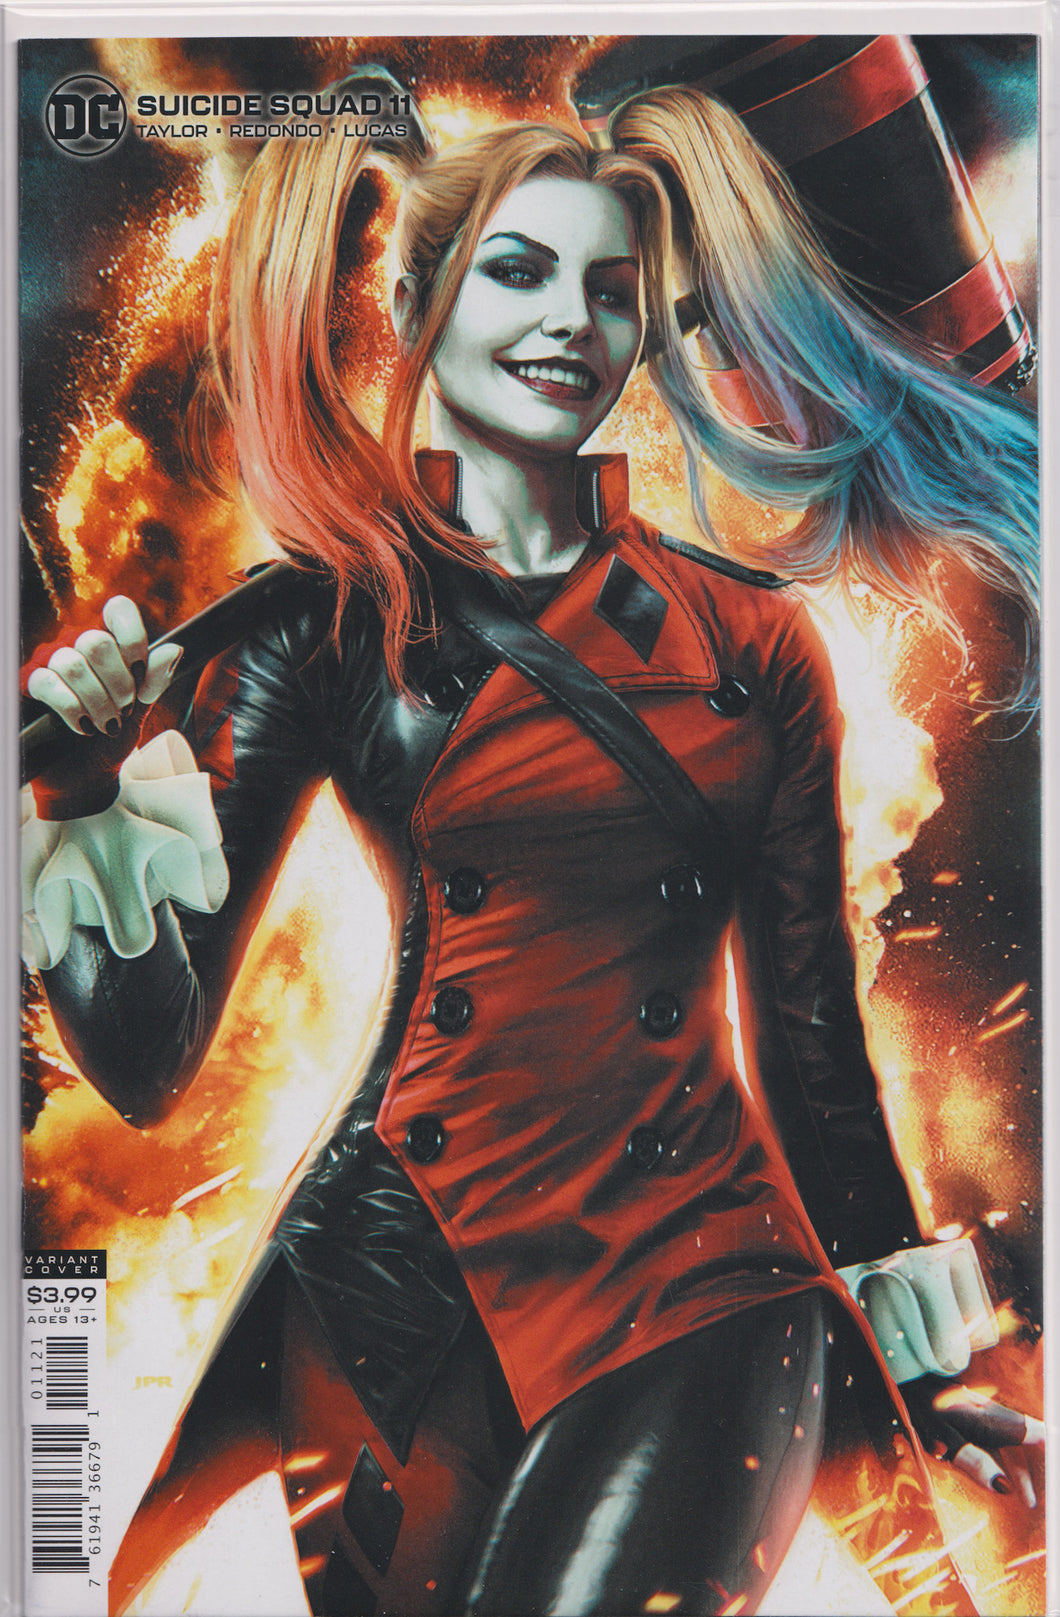 SUICIDE SQUAD #11 (JEREMY ROBERTS VARIANT)(HARLEY QUINN)(2020) COMIC BOOK ~ DC